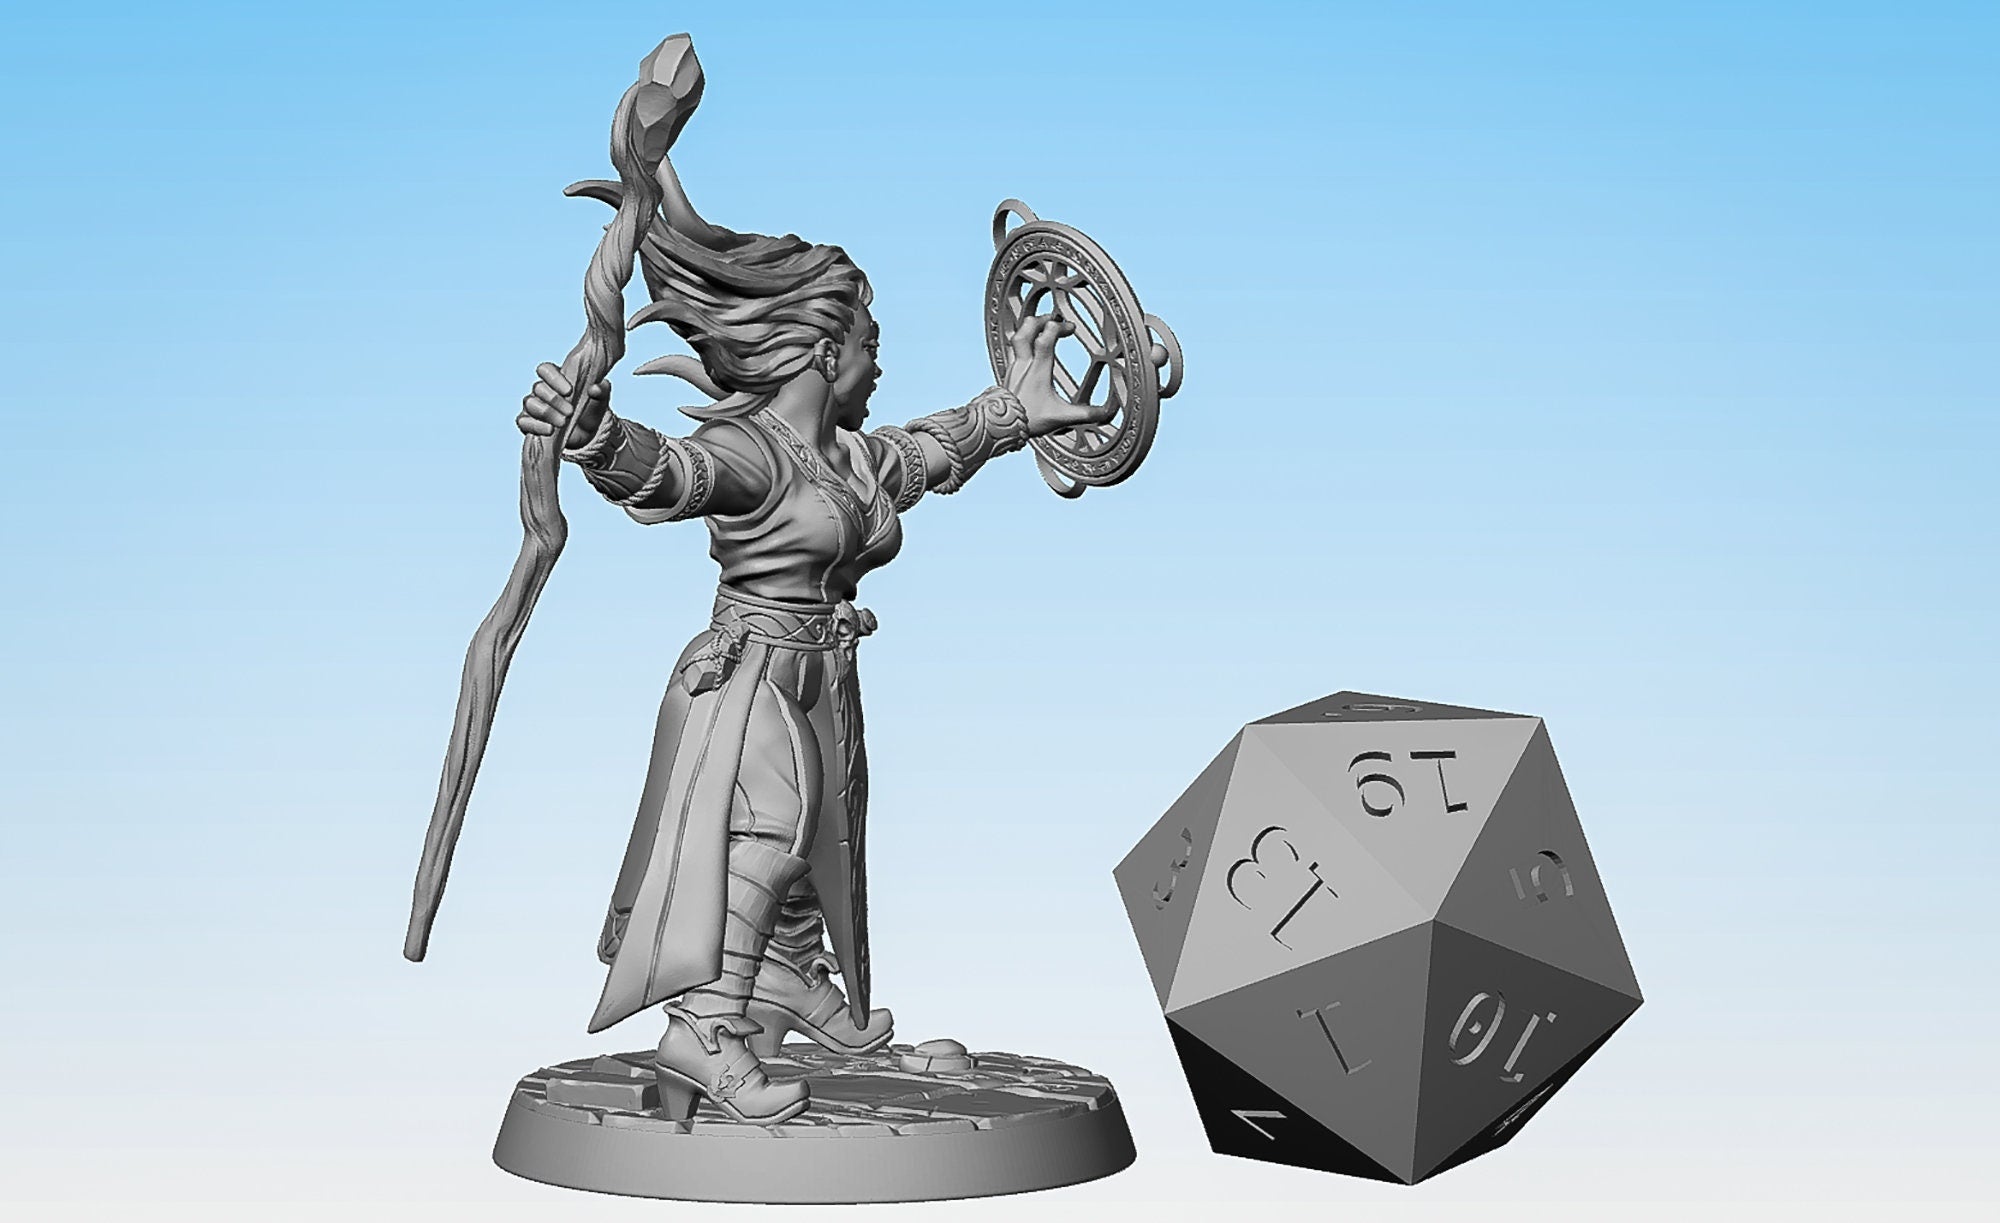 MAGE WIZARD "Staff & Spell" (Apprentice Arcanist E)-Role Playing Miniatures